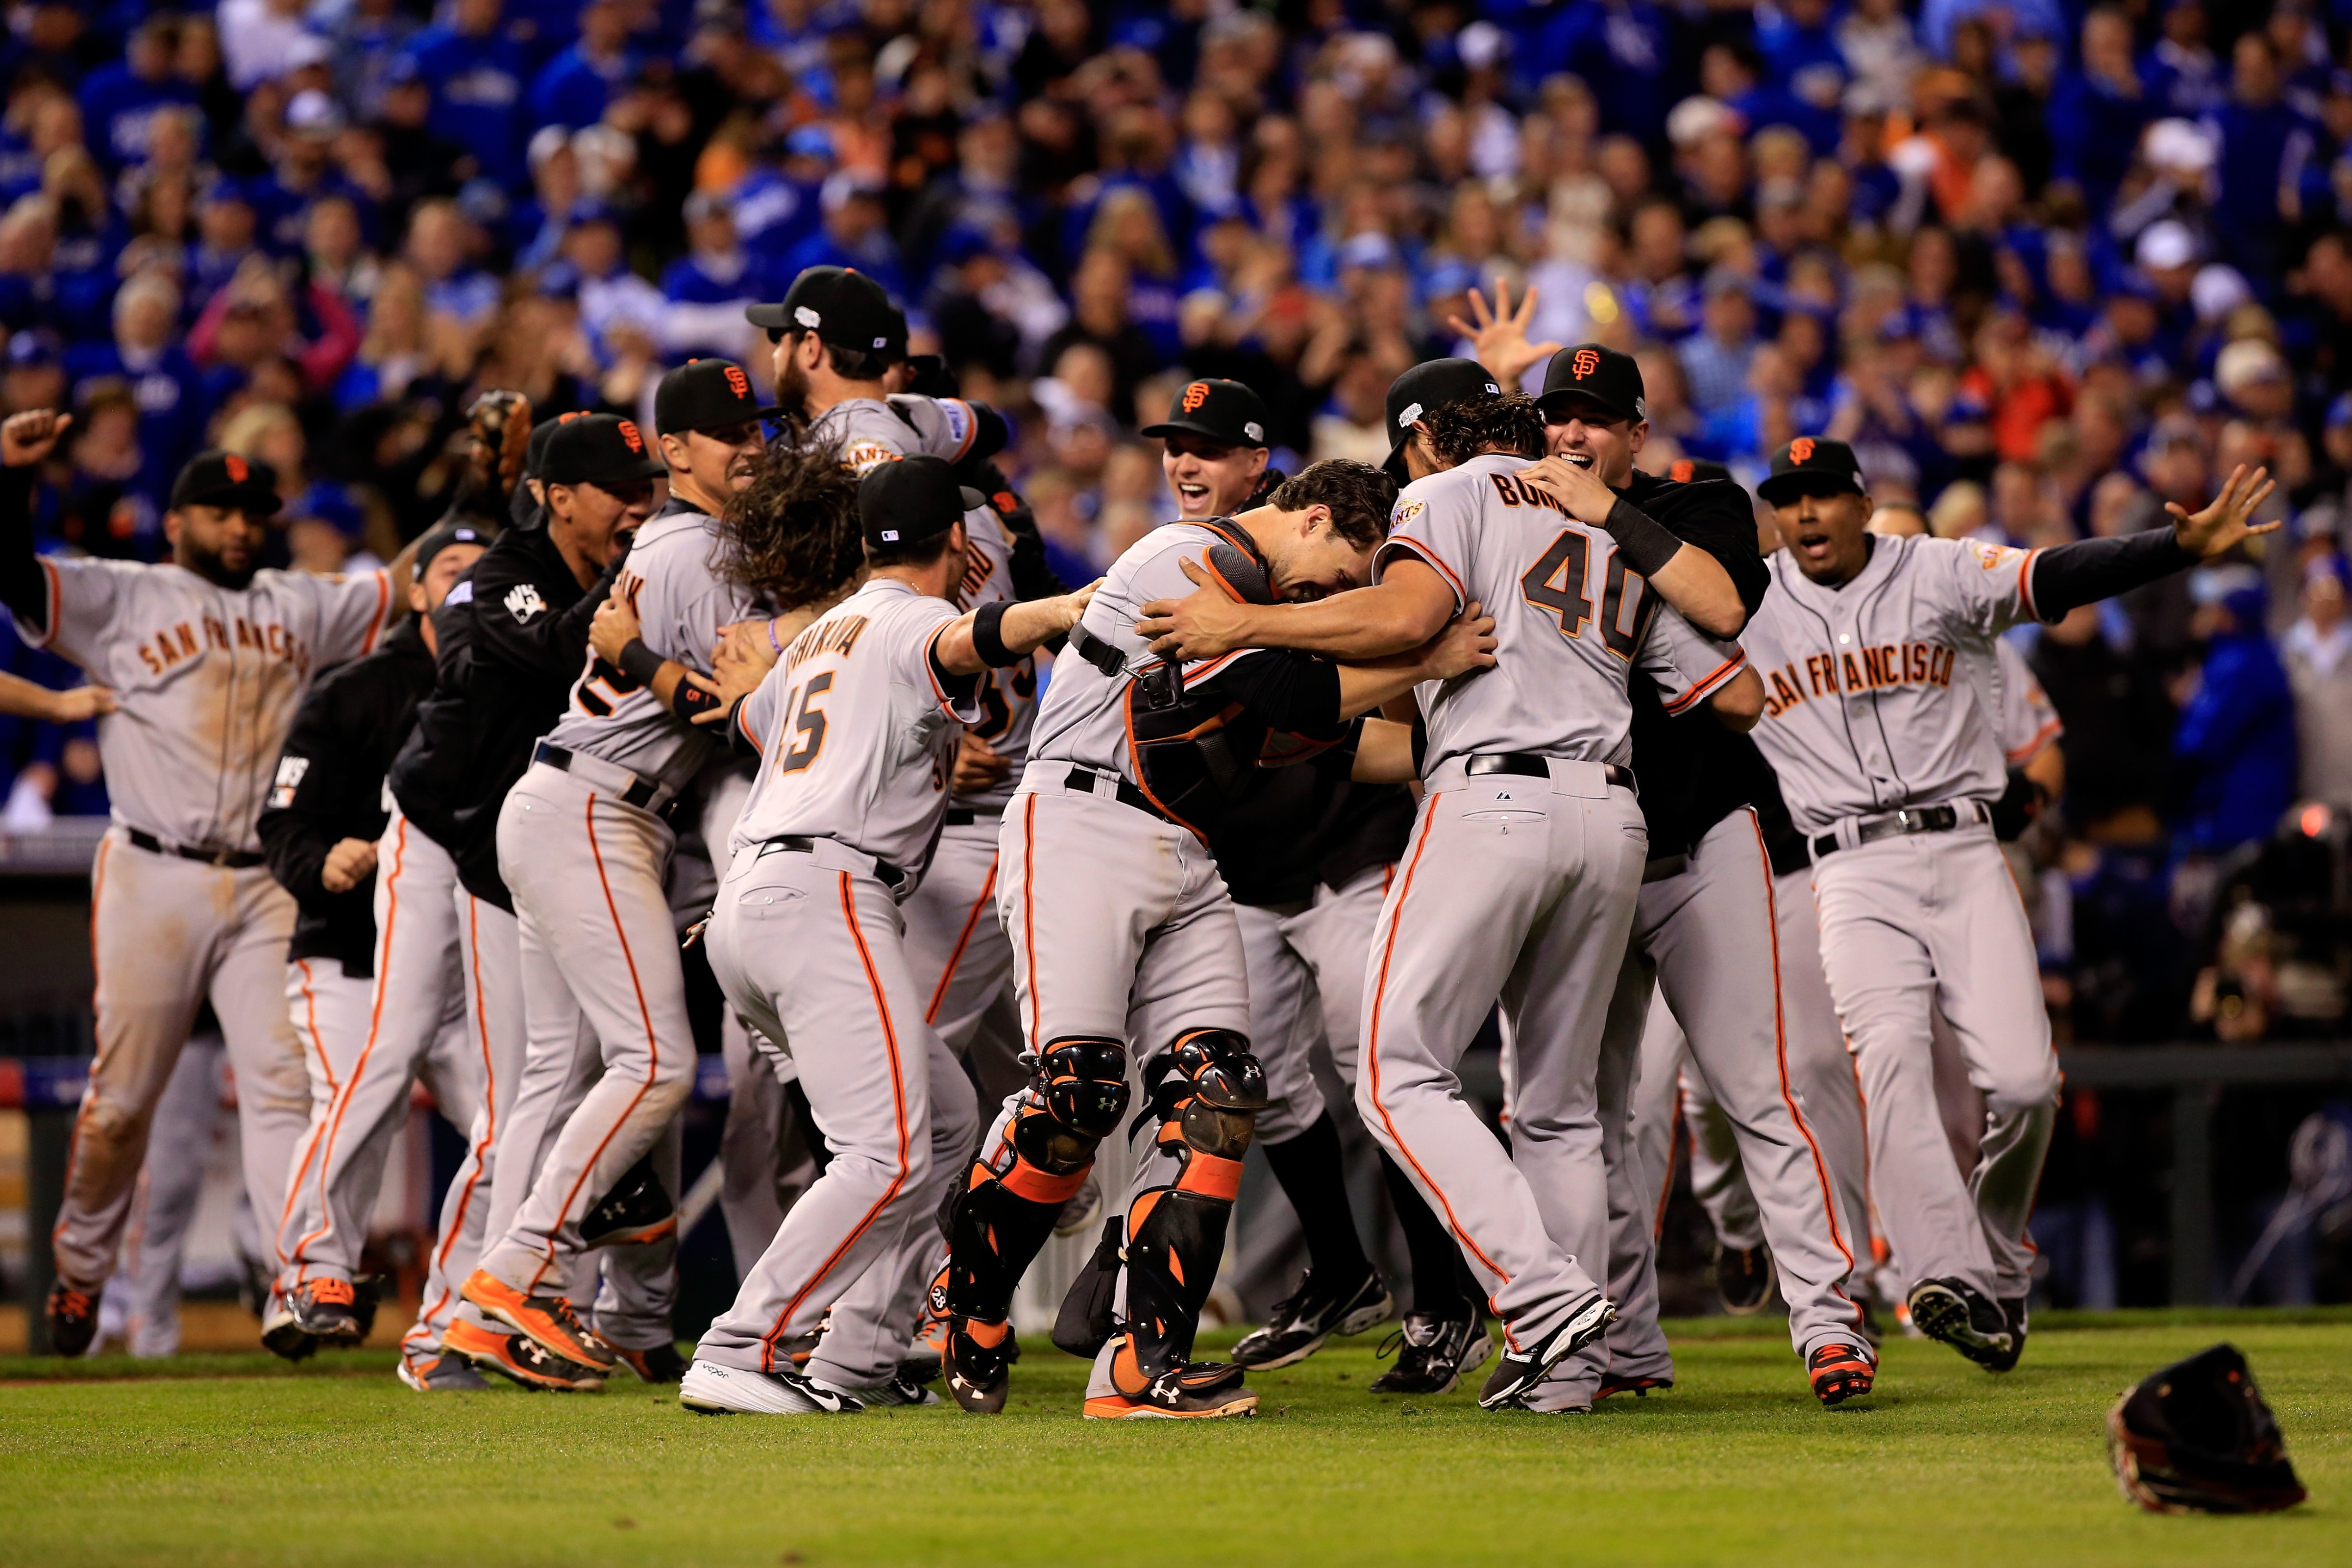 The San Francisco Giants celebrate after defeating the Kansas City Royals to win Game Seven of the 2014 World Series by a score of 3-2 at Kauffman Stadium on October 29, 2014 in Kansas City, Missouri. (Jamie Squire&mdash;Getty Images)